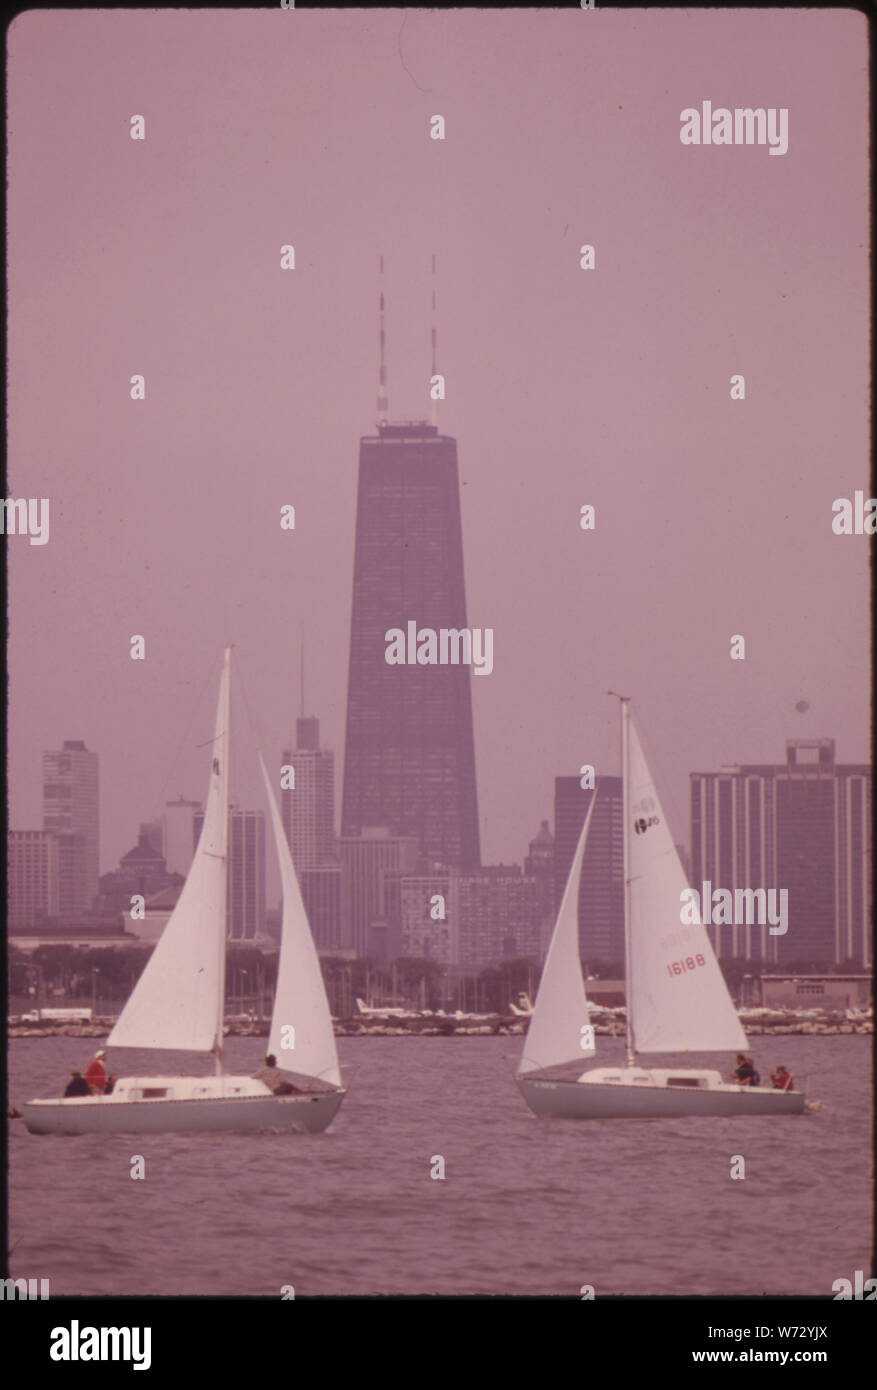 Photograph of Sailboats Near the Lake Michigan Shoreline; Scope and content:  Original caption: Sailboats near the Lake Michigan shoreline with downtown Chicago in the background.  The 110 story Sears Tower, billed as the world's tallest building in early 1974, is seen between the sailboats Barely visible at the extreme left is the Standard Oil building, the second tallest structure in Chicago. Stock Photo